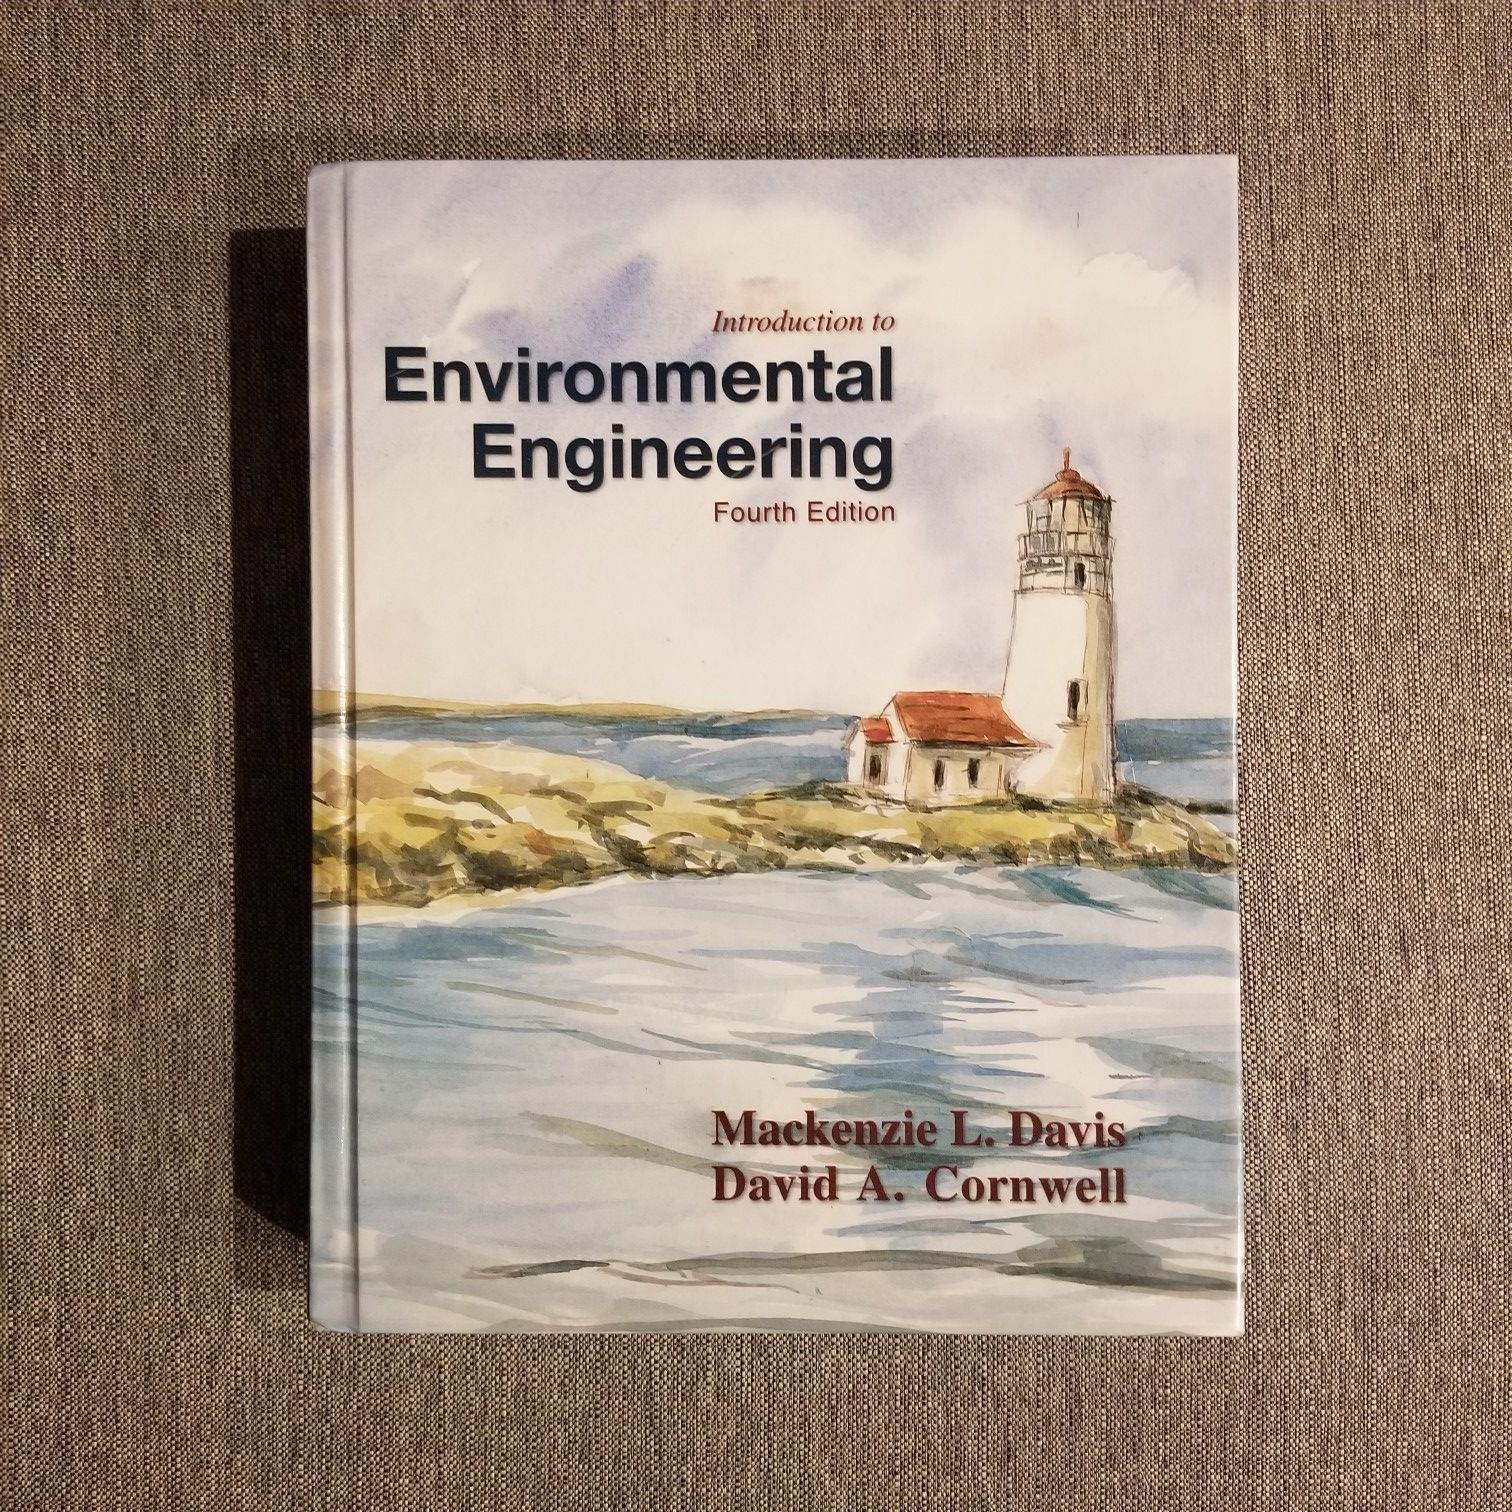 Introduction to Environmental Engineering by Mackenzie L. Davis and David A. Cornwell